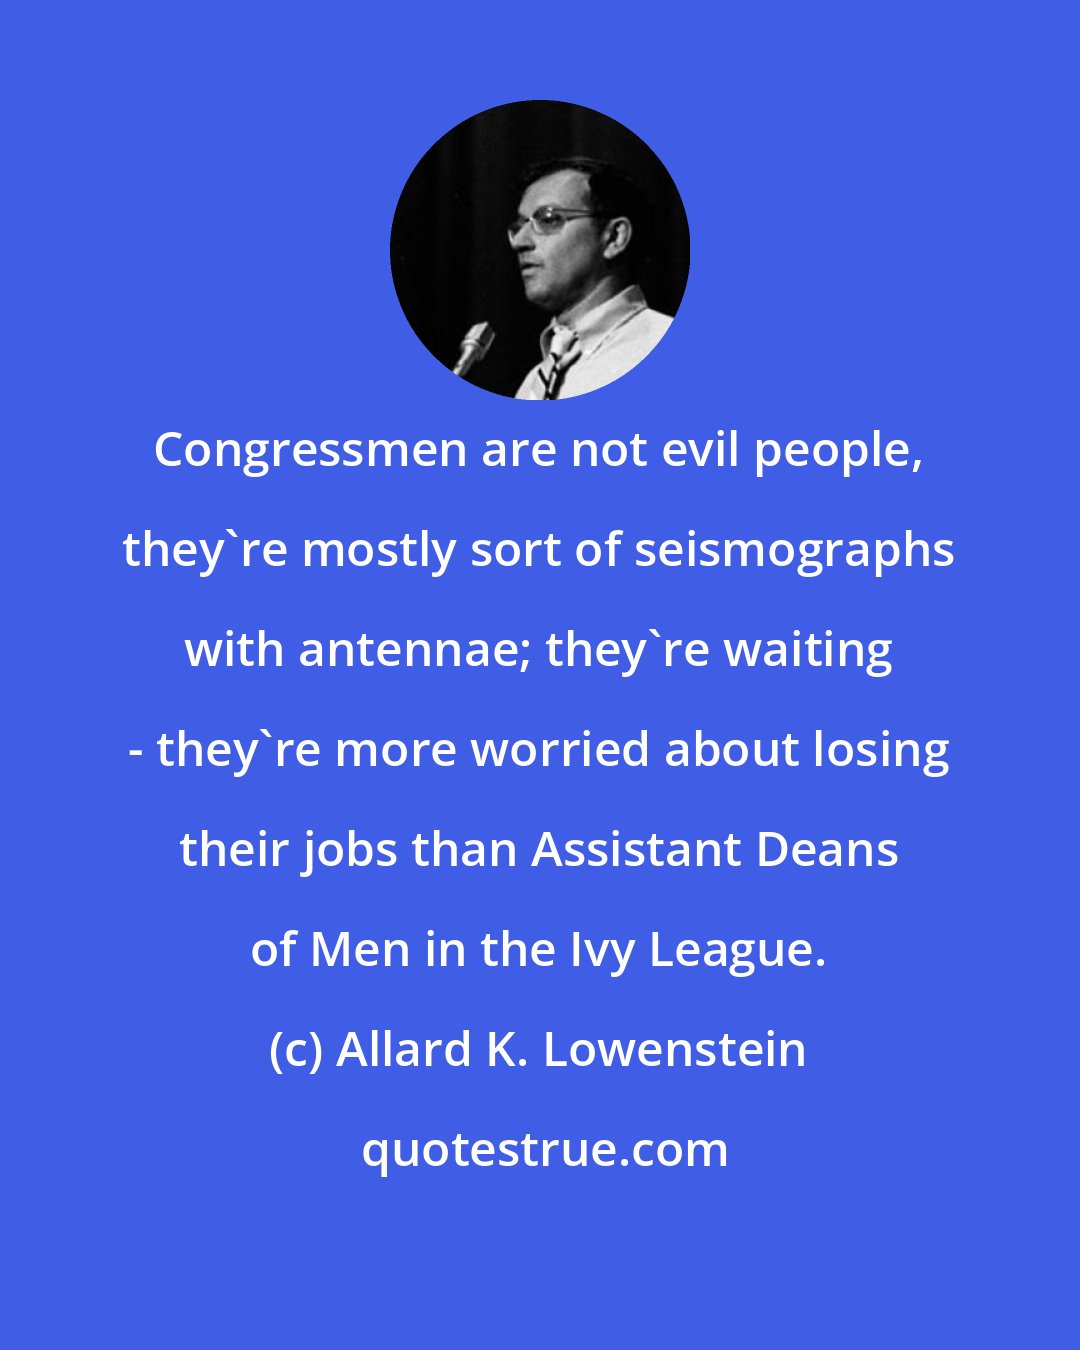 Allard K. Lowenstein: Congressmen are not evil people, they're mostly sort of seismographs with antennae; they're waiting - they're more worried about losing their jobs than Assistant Deans of Men in the Ivy League.